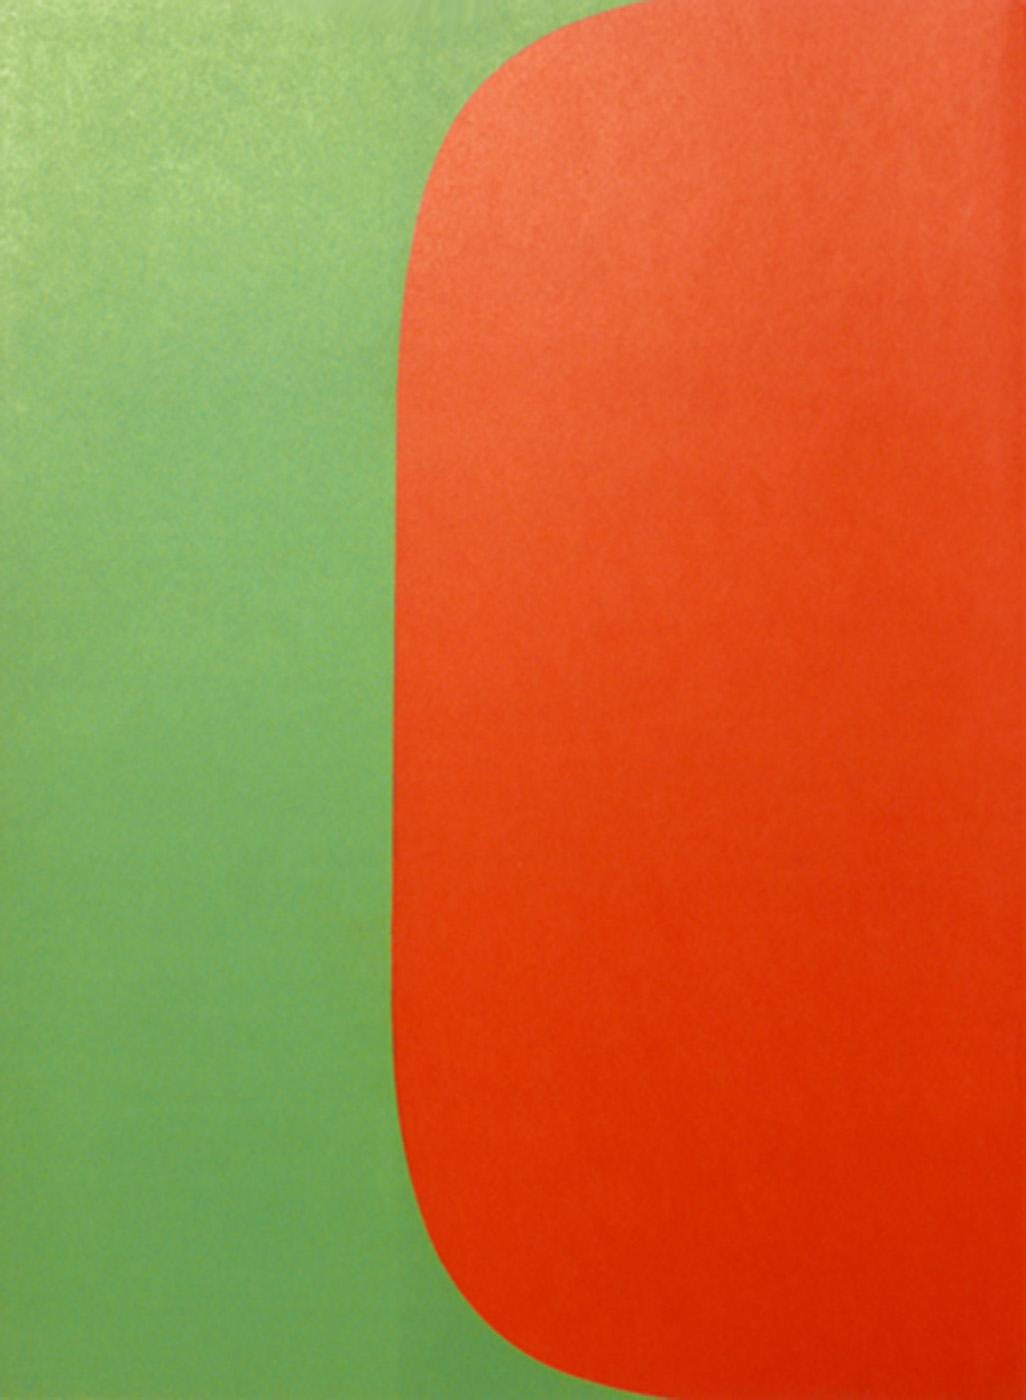 Selection of Ellsworth Kelly color lithographs, French, circa 1960s. They are from the limited edition folio “Derriere le Miroir”, published by the legendary Galerie Maeght, circa 1960s. Please see our other 1stdibs listings for more Ellsworth Kelly